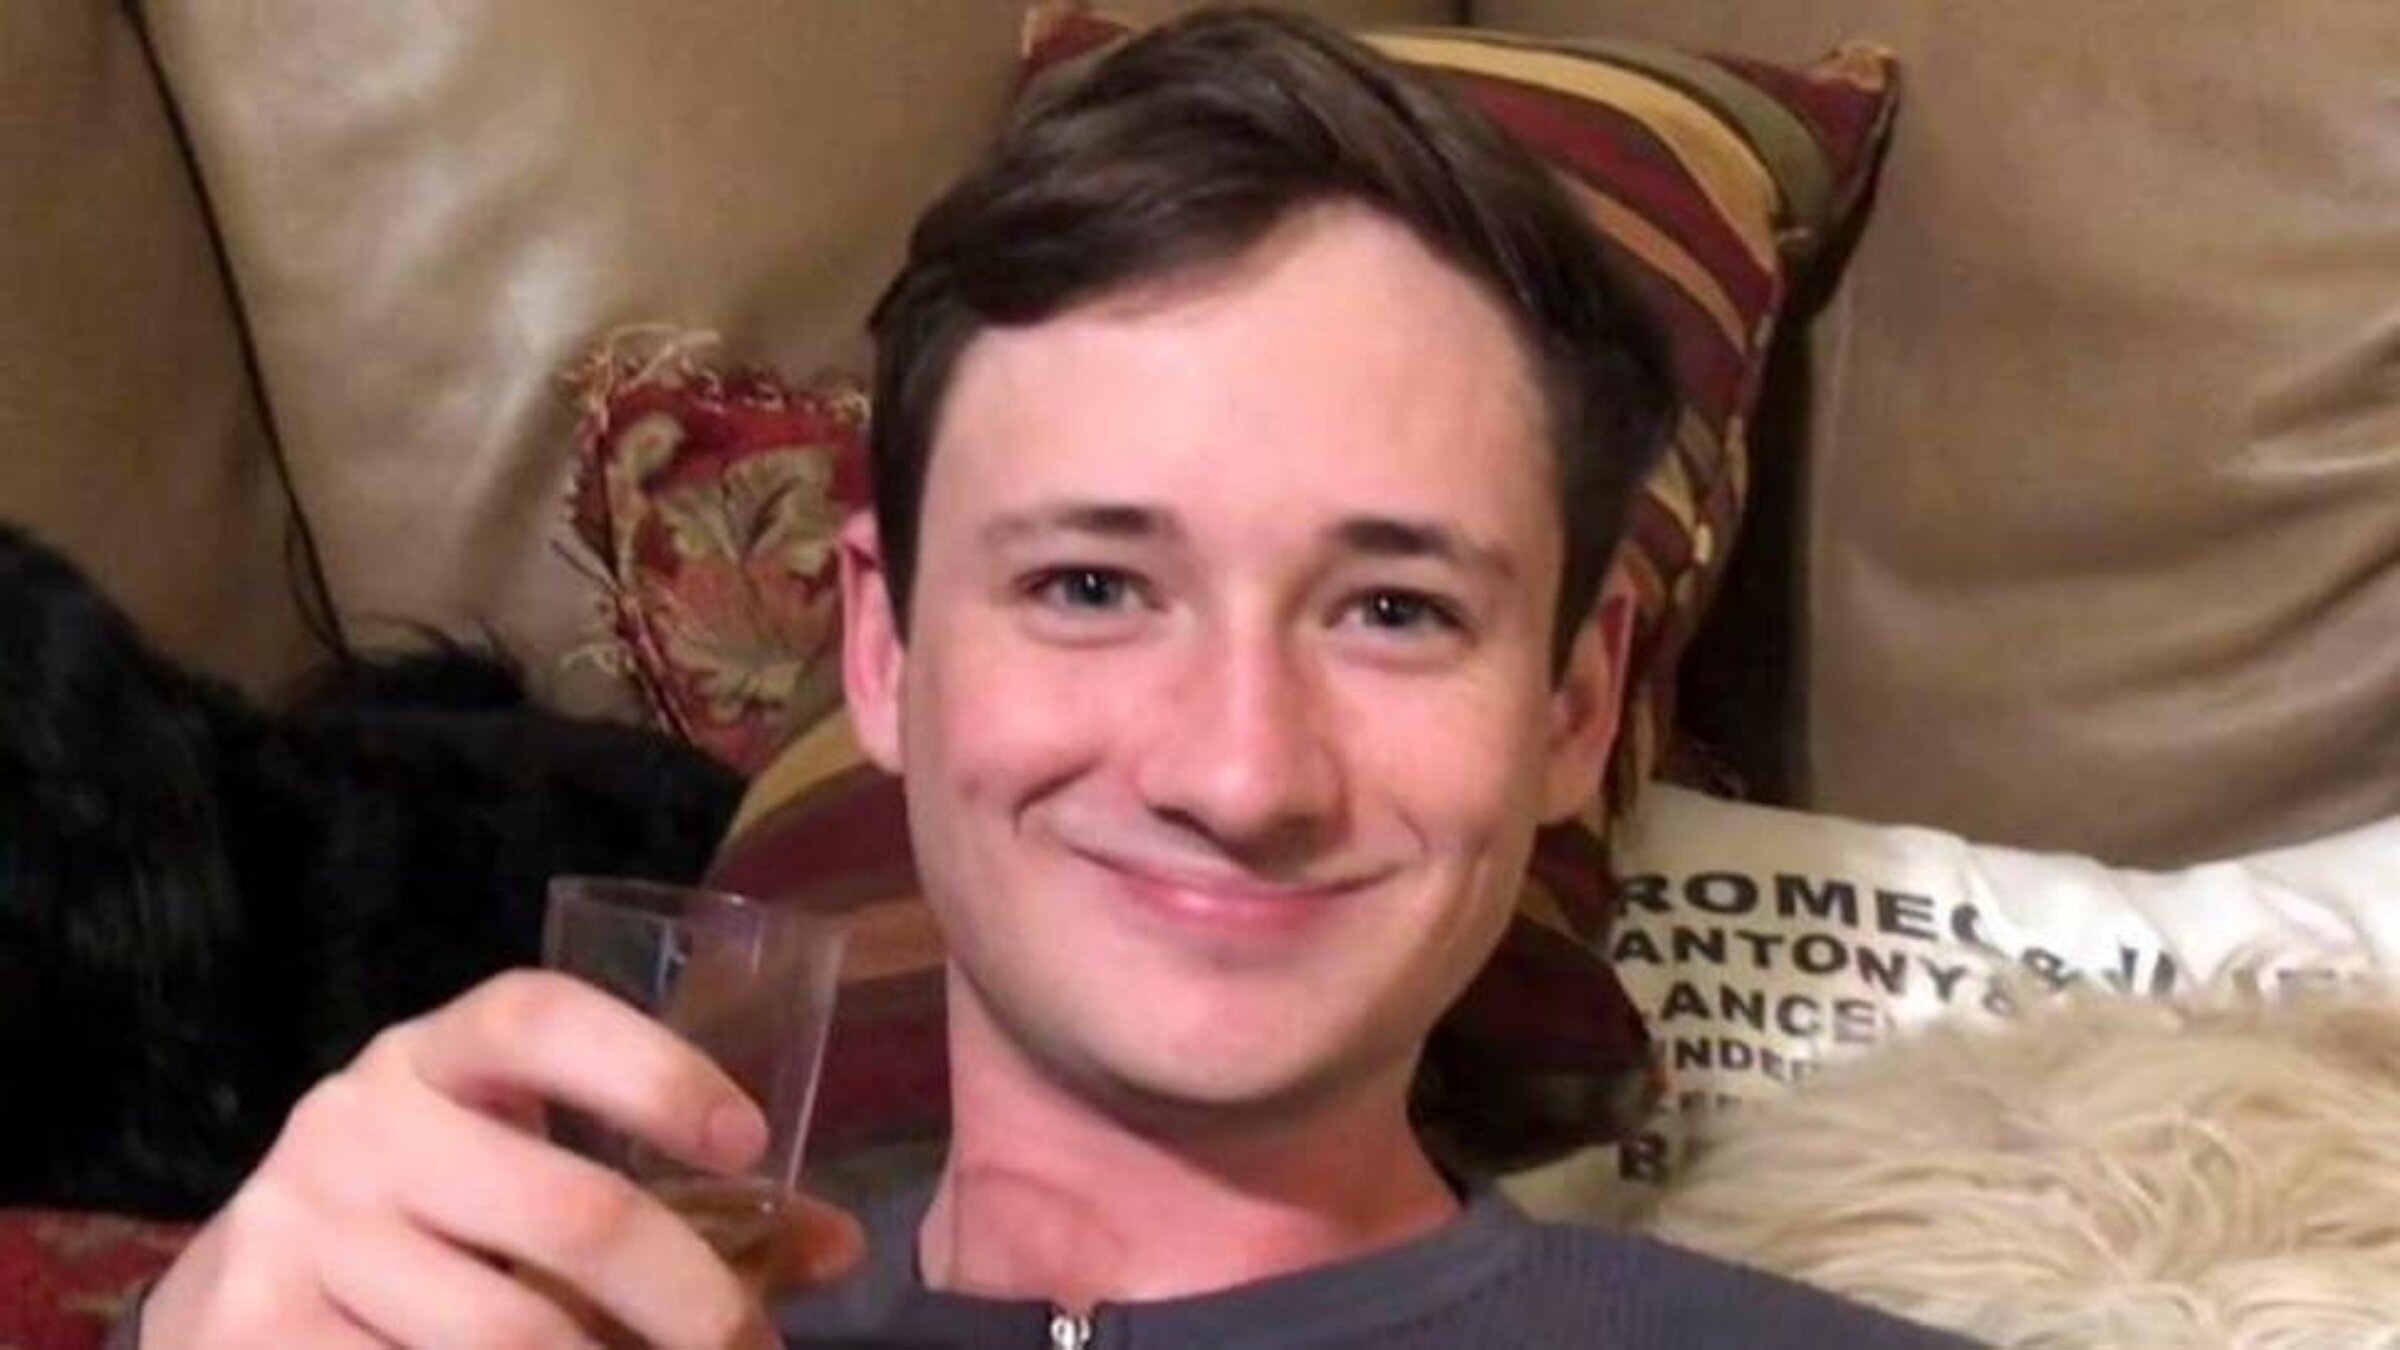 19-year-old Blaze Bernstein, a student at the University of Pennsylvania, was murdered in January 2018.